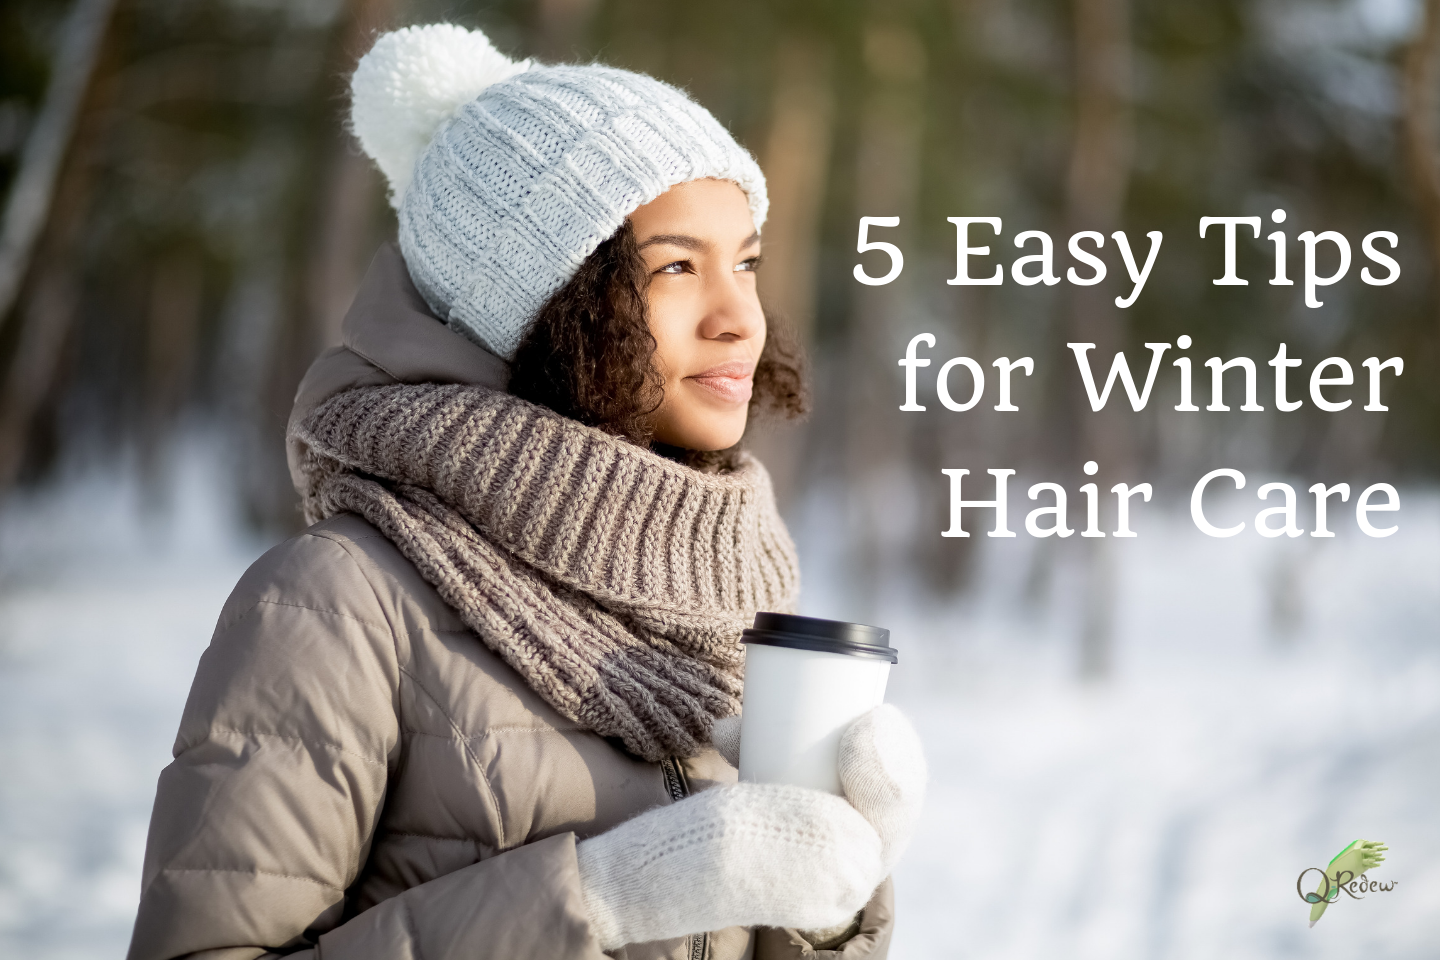 5 Simple Tips for Winter Hair Care